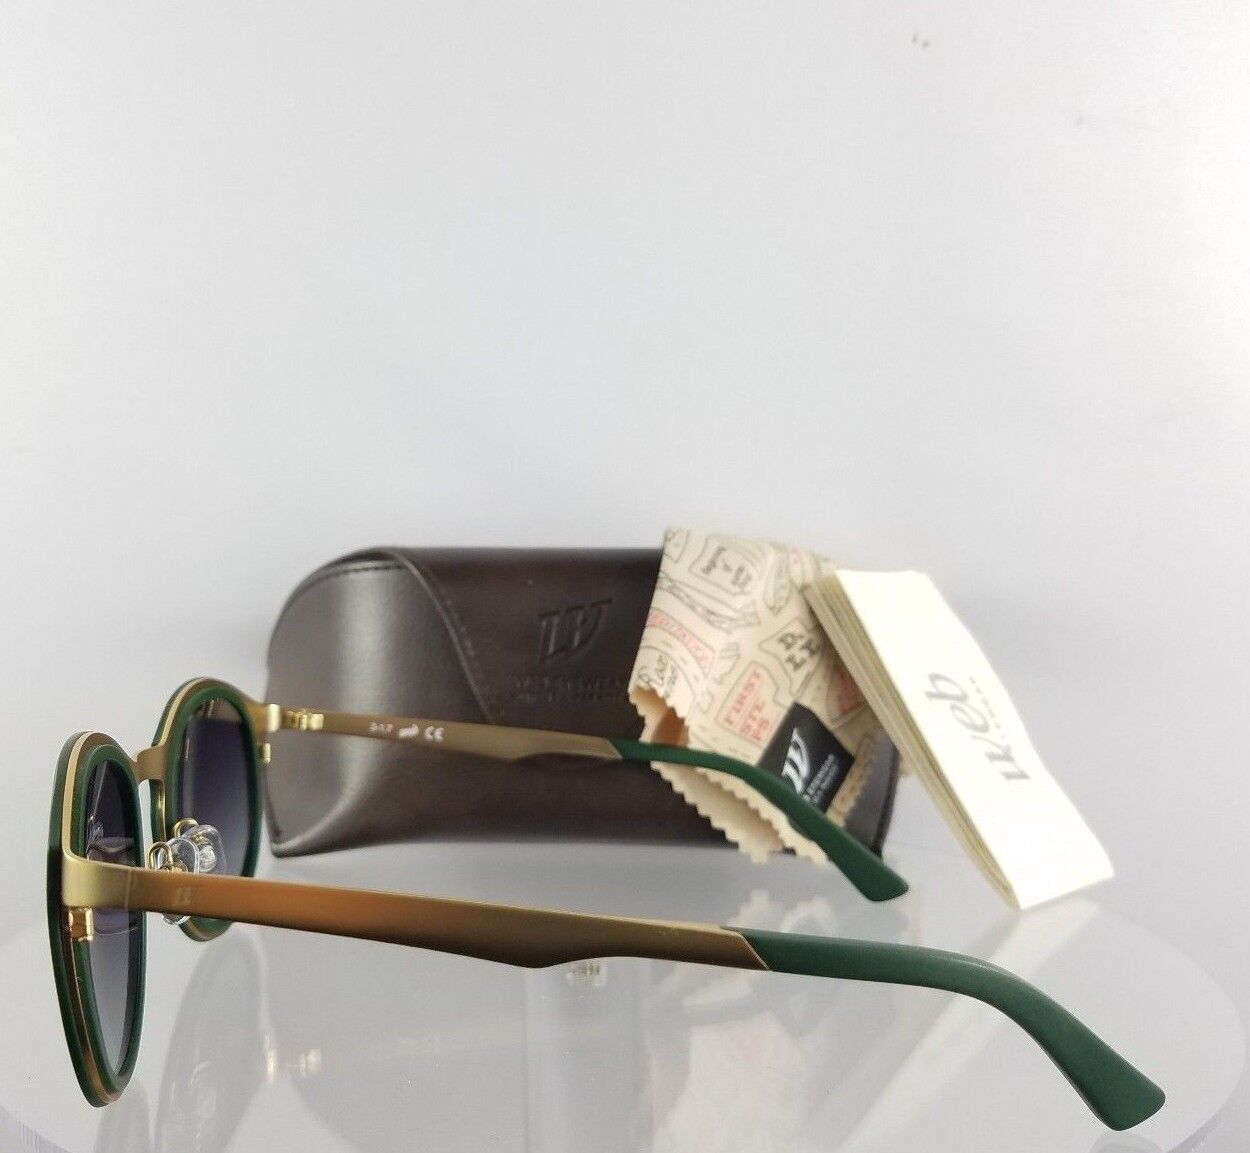 Brand New Authentic Web Sunglasses WE 0142 Col. 97B Green Gold 49mm 142 Frame